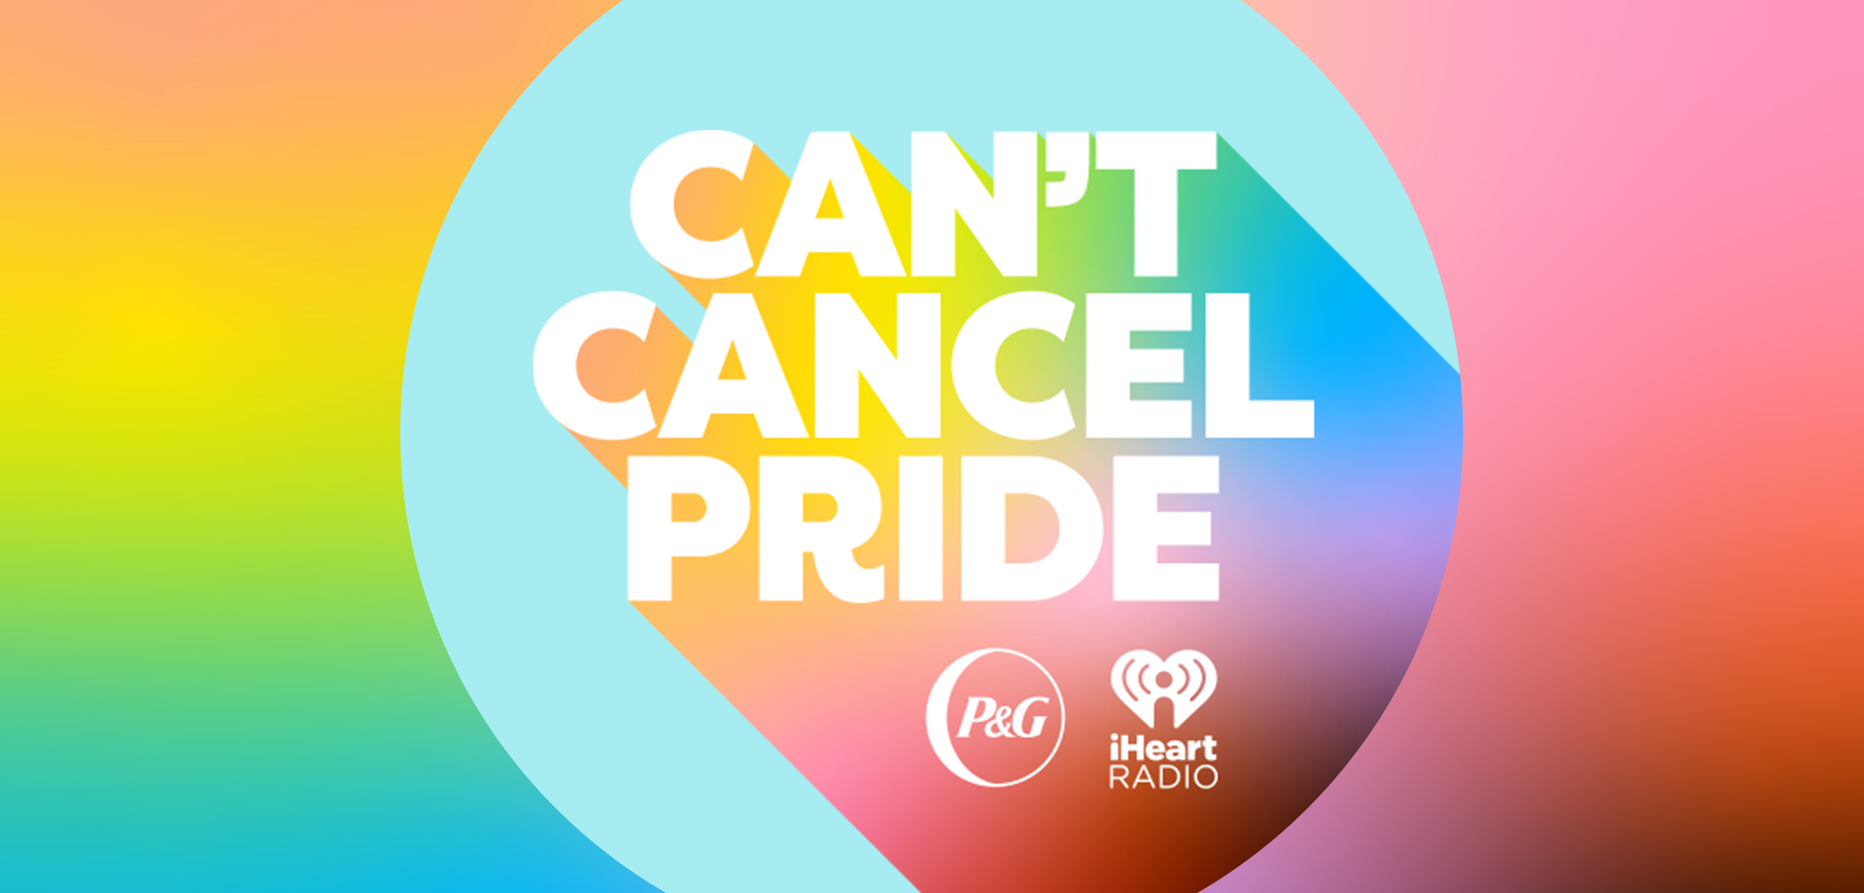 Can’t Cancel Pride LGBT Life Center